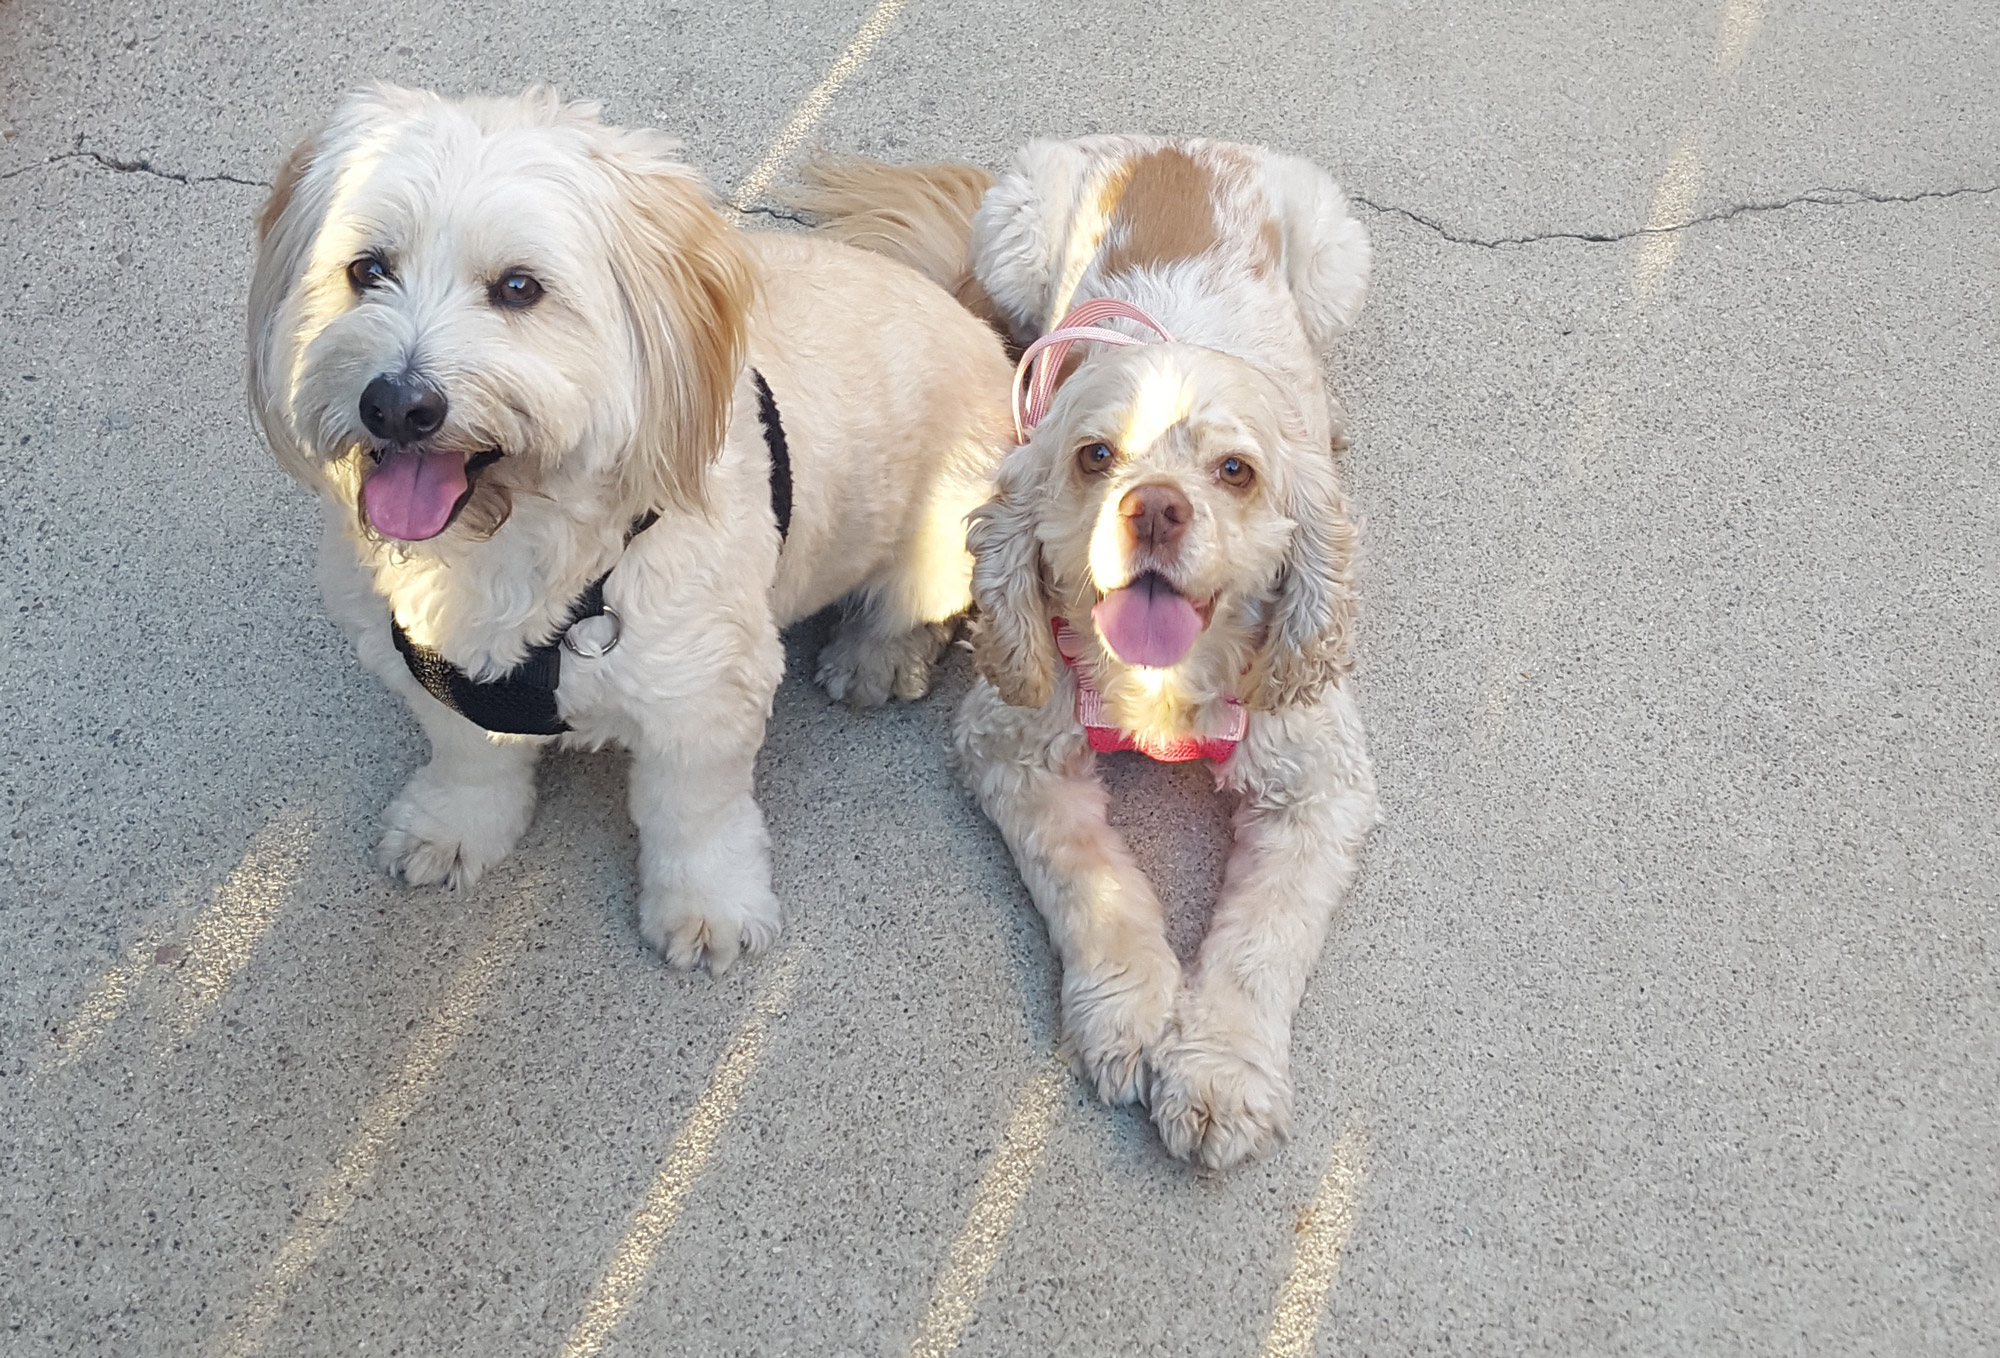 Dogs: Gracie and Griffin